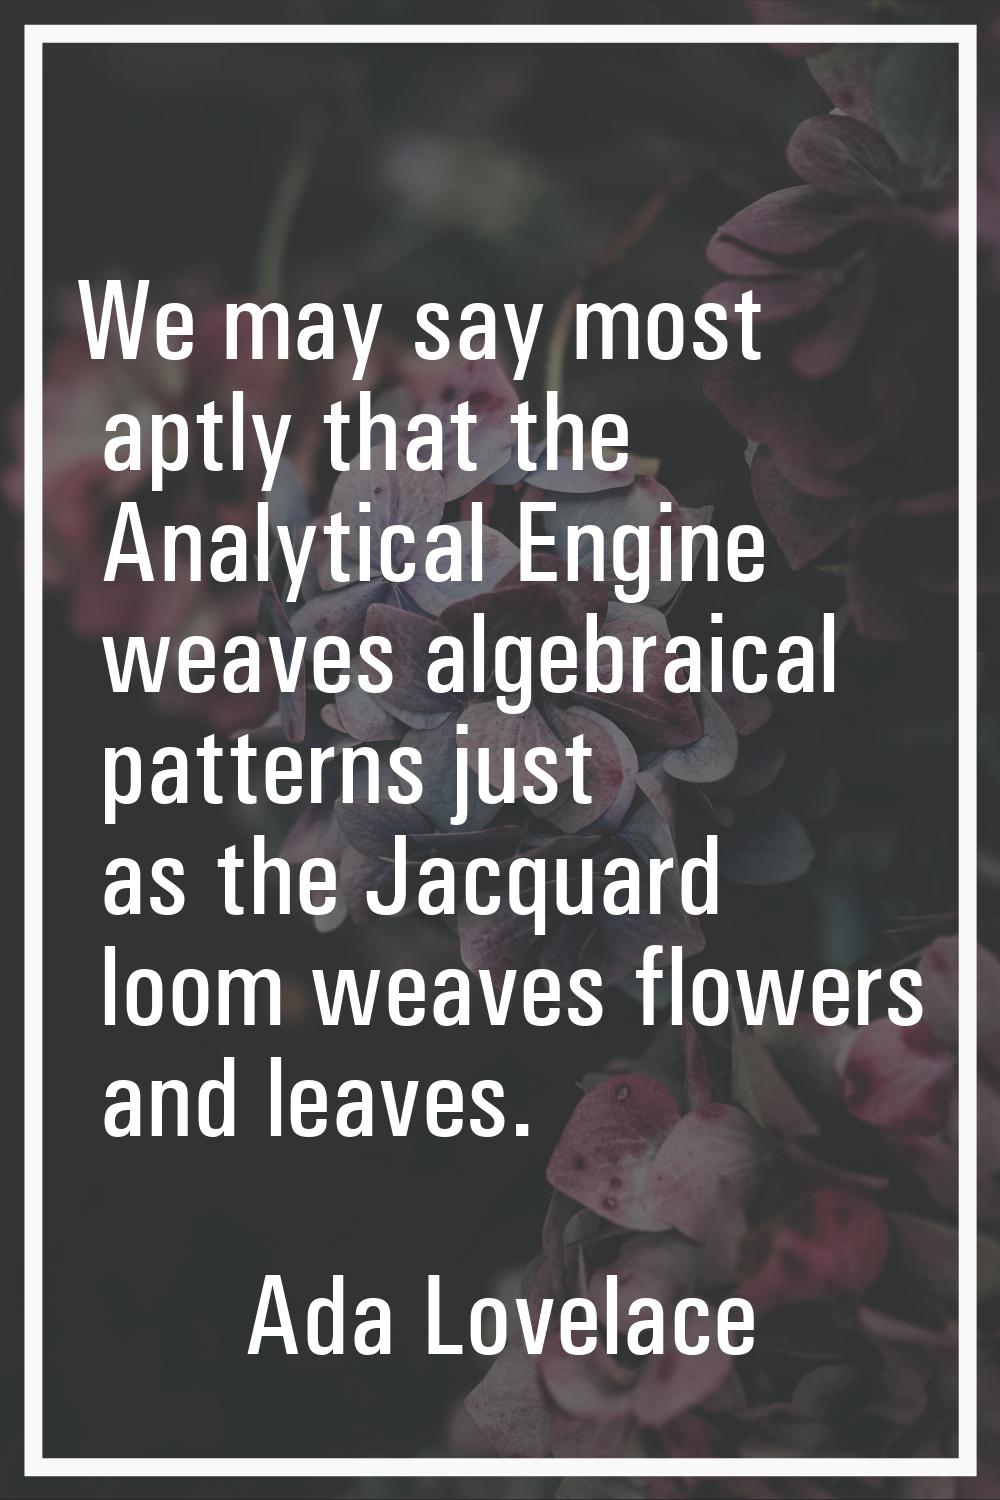 We may say most aptly that the Analytical Engine weaves algebraical patterns just as the Jacquard l